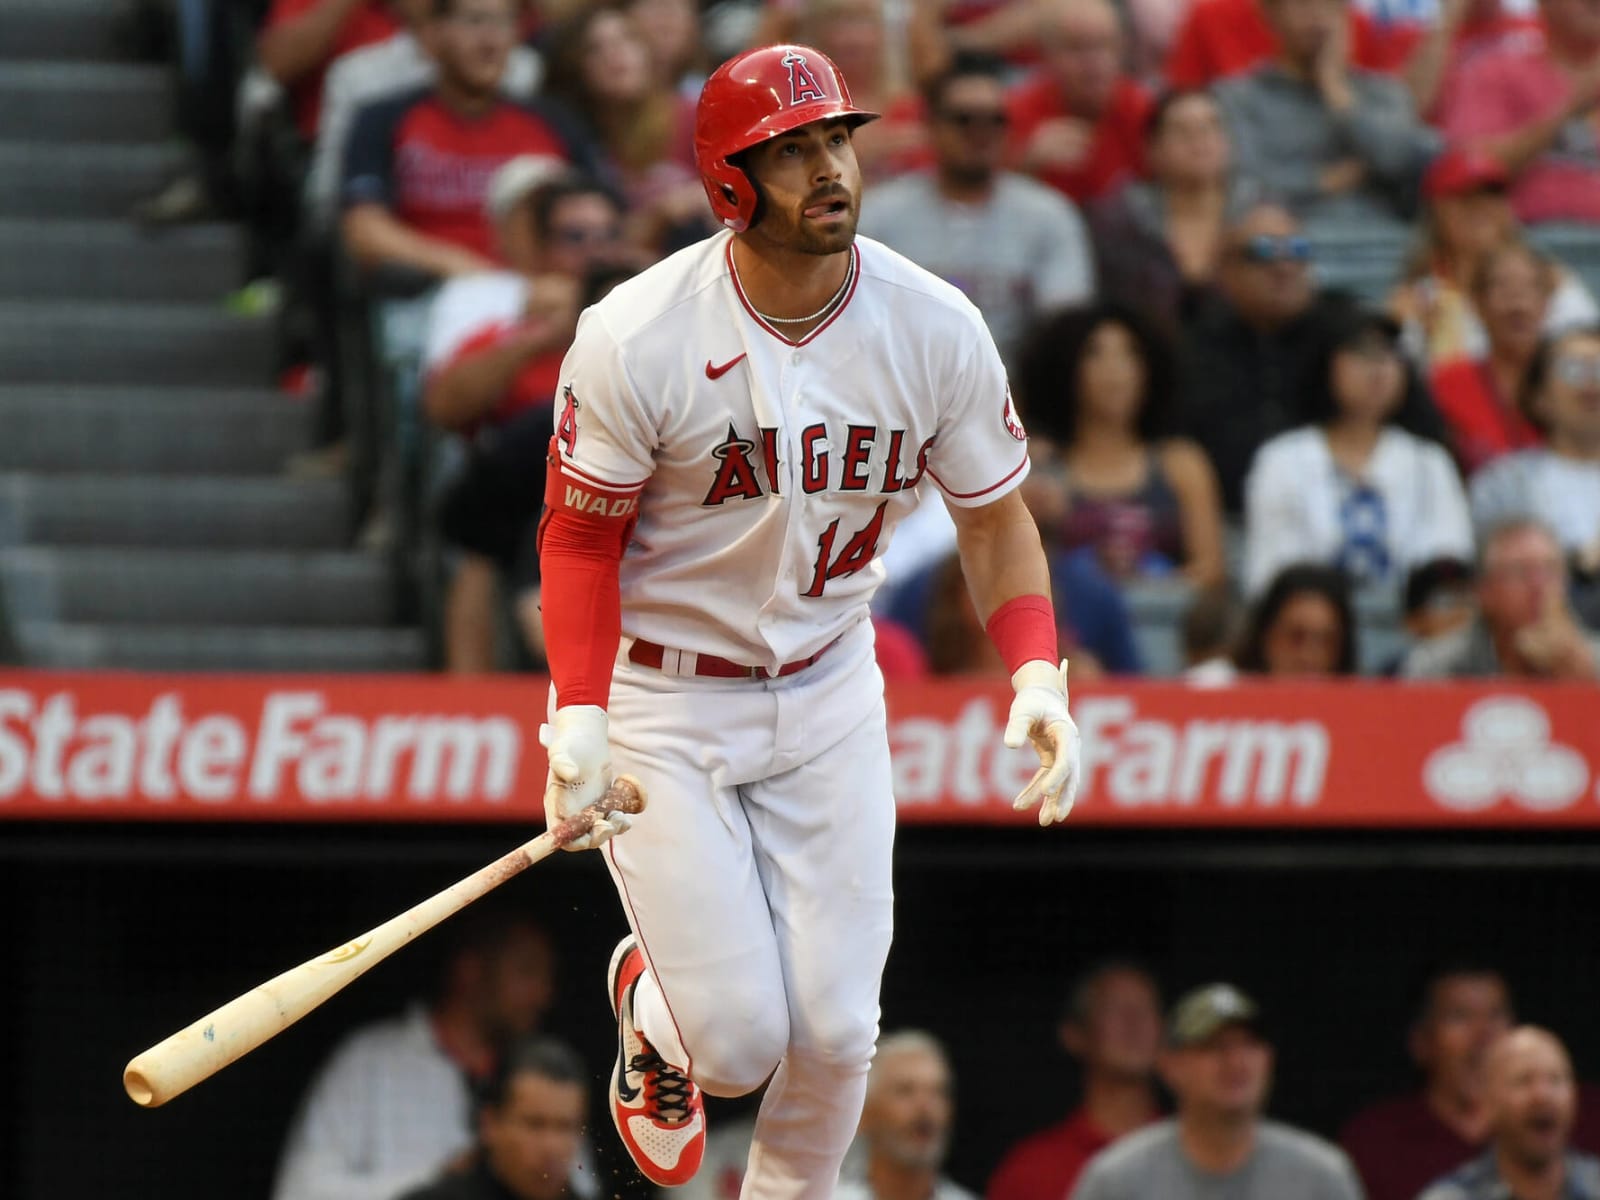 Yankees bring back Wade in trade with Angels